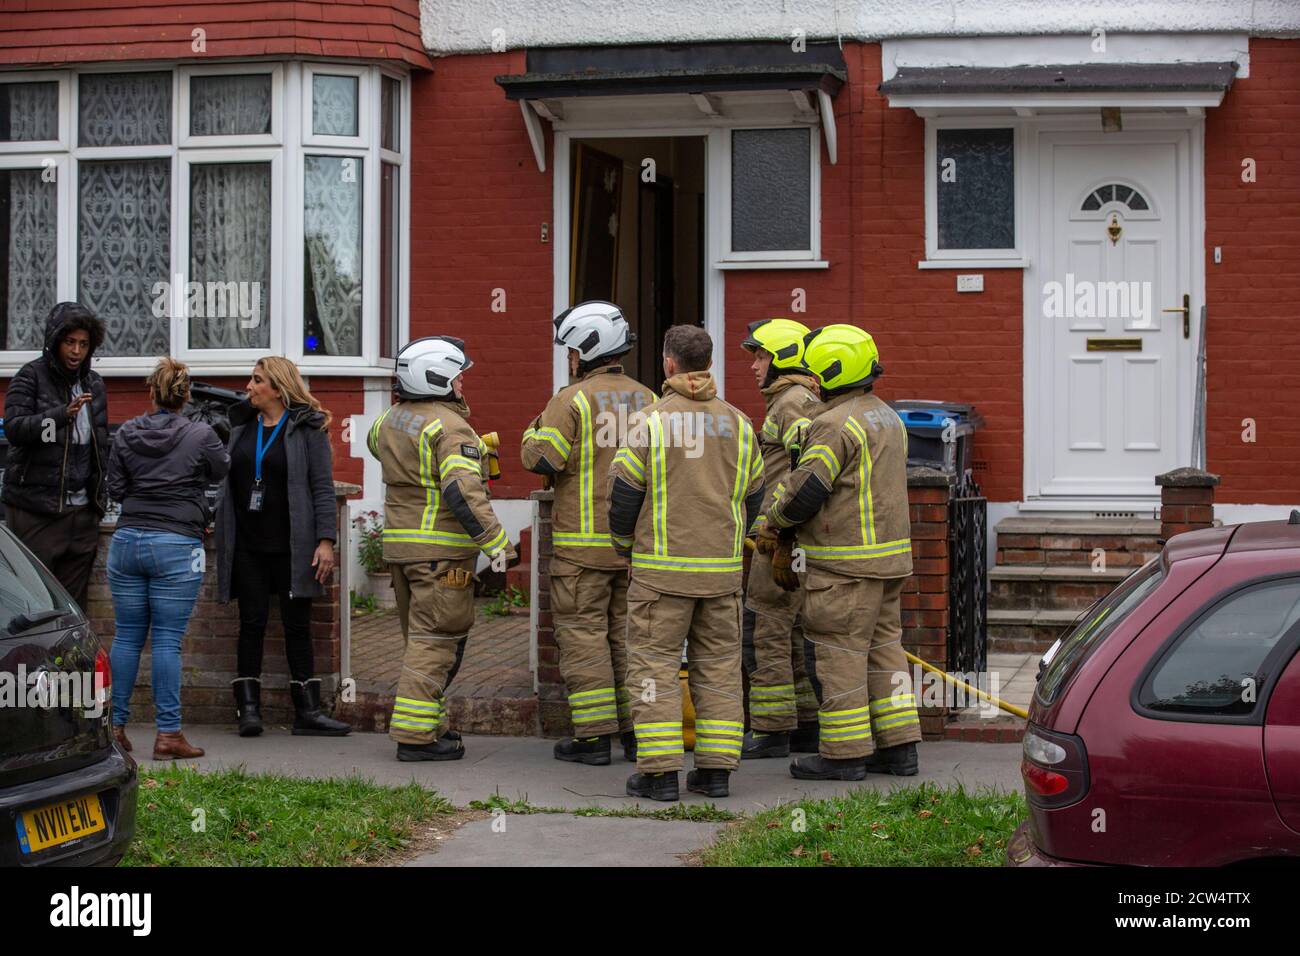 London Fire Brigade attend a house fire in a residential street in Croydon, South London, England, United Kingdom Stock Photo